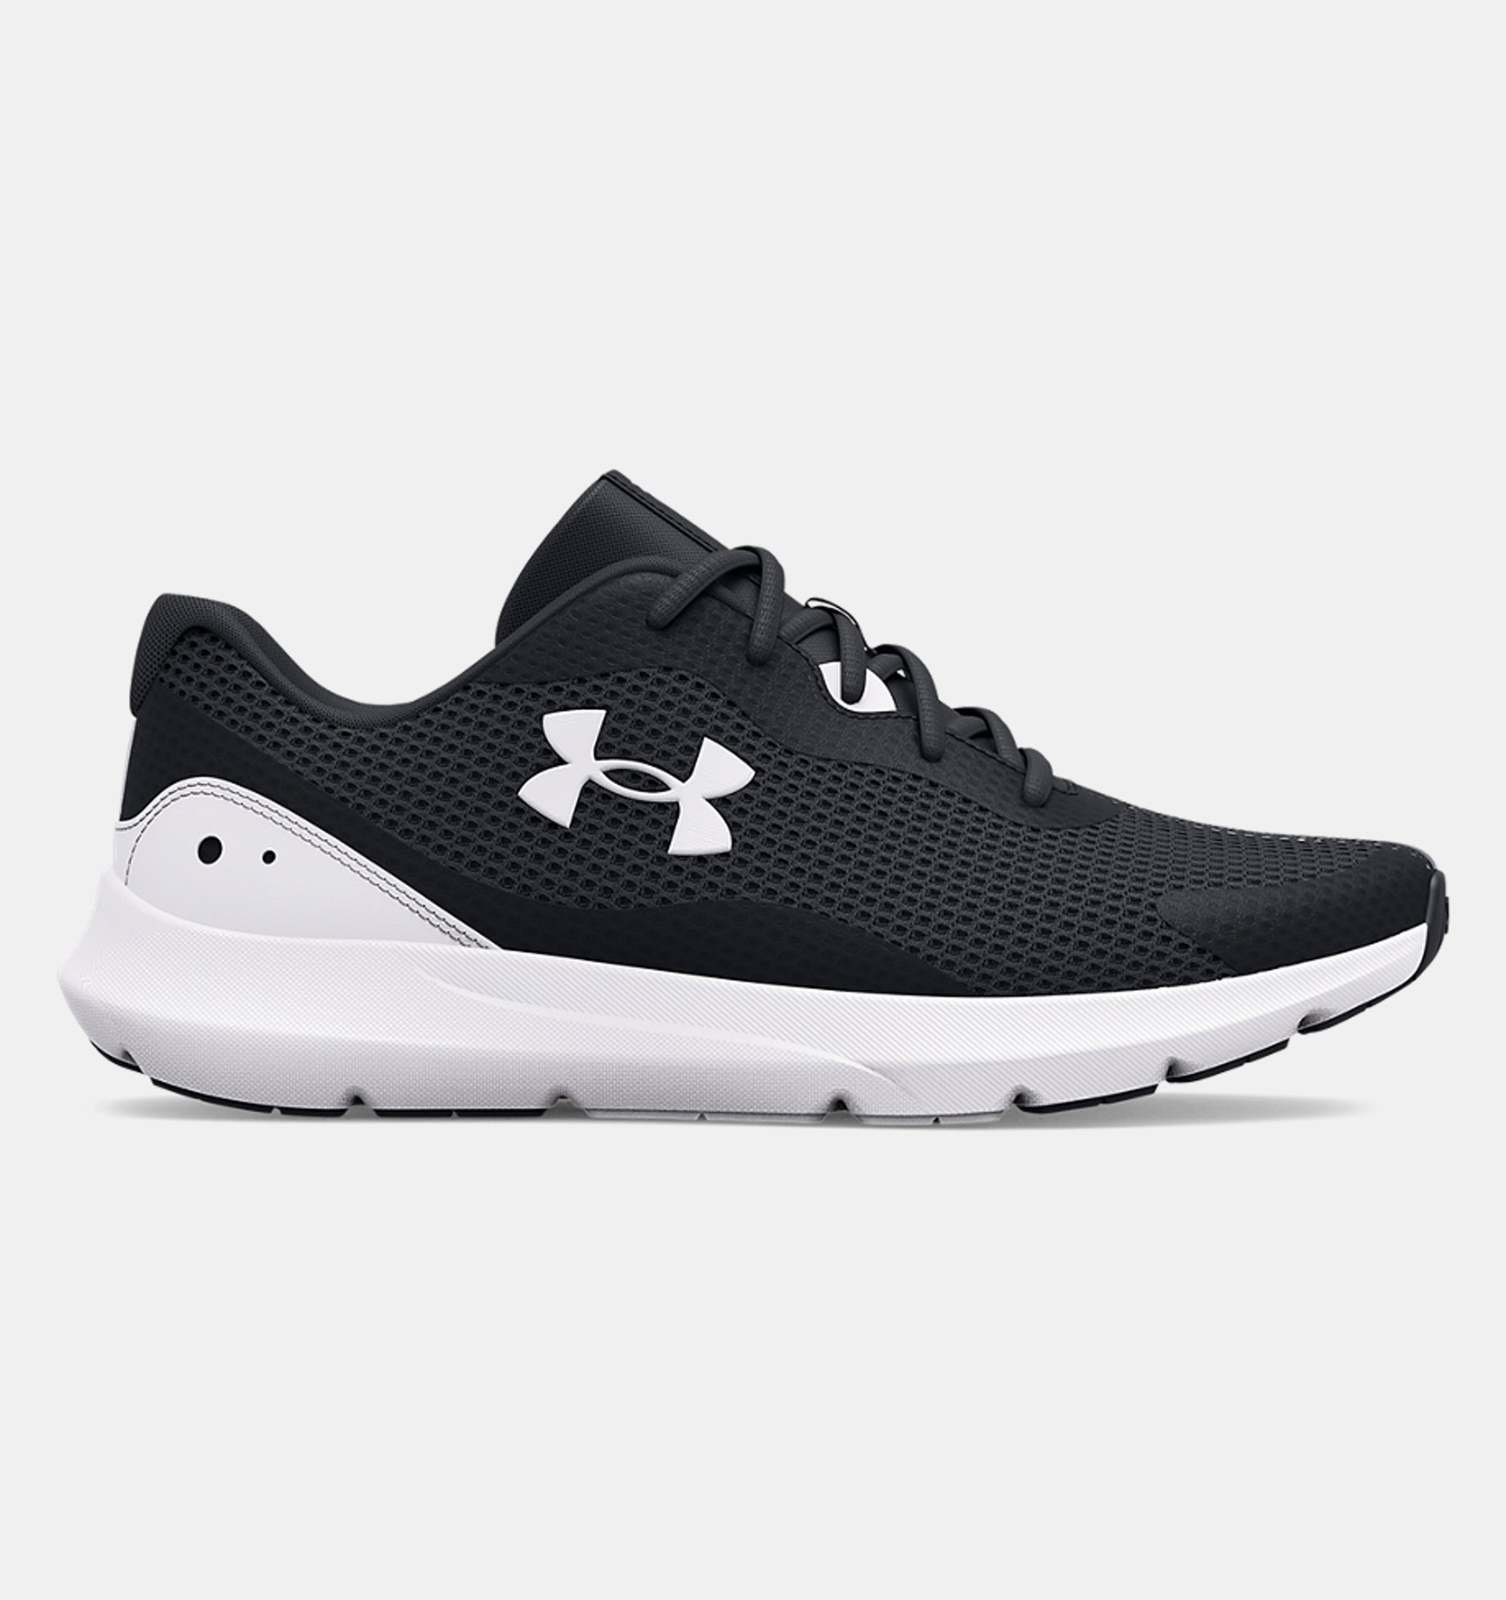 Under Armour - 3024883 Men's UA Surge 3 Running Shoes - 001/7171 Ανδρικά > Παπούτσια > Αθλητικά > Παπούτσι Low Cut